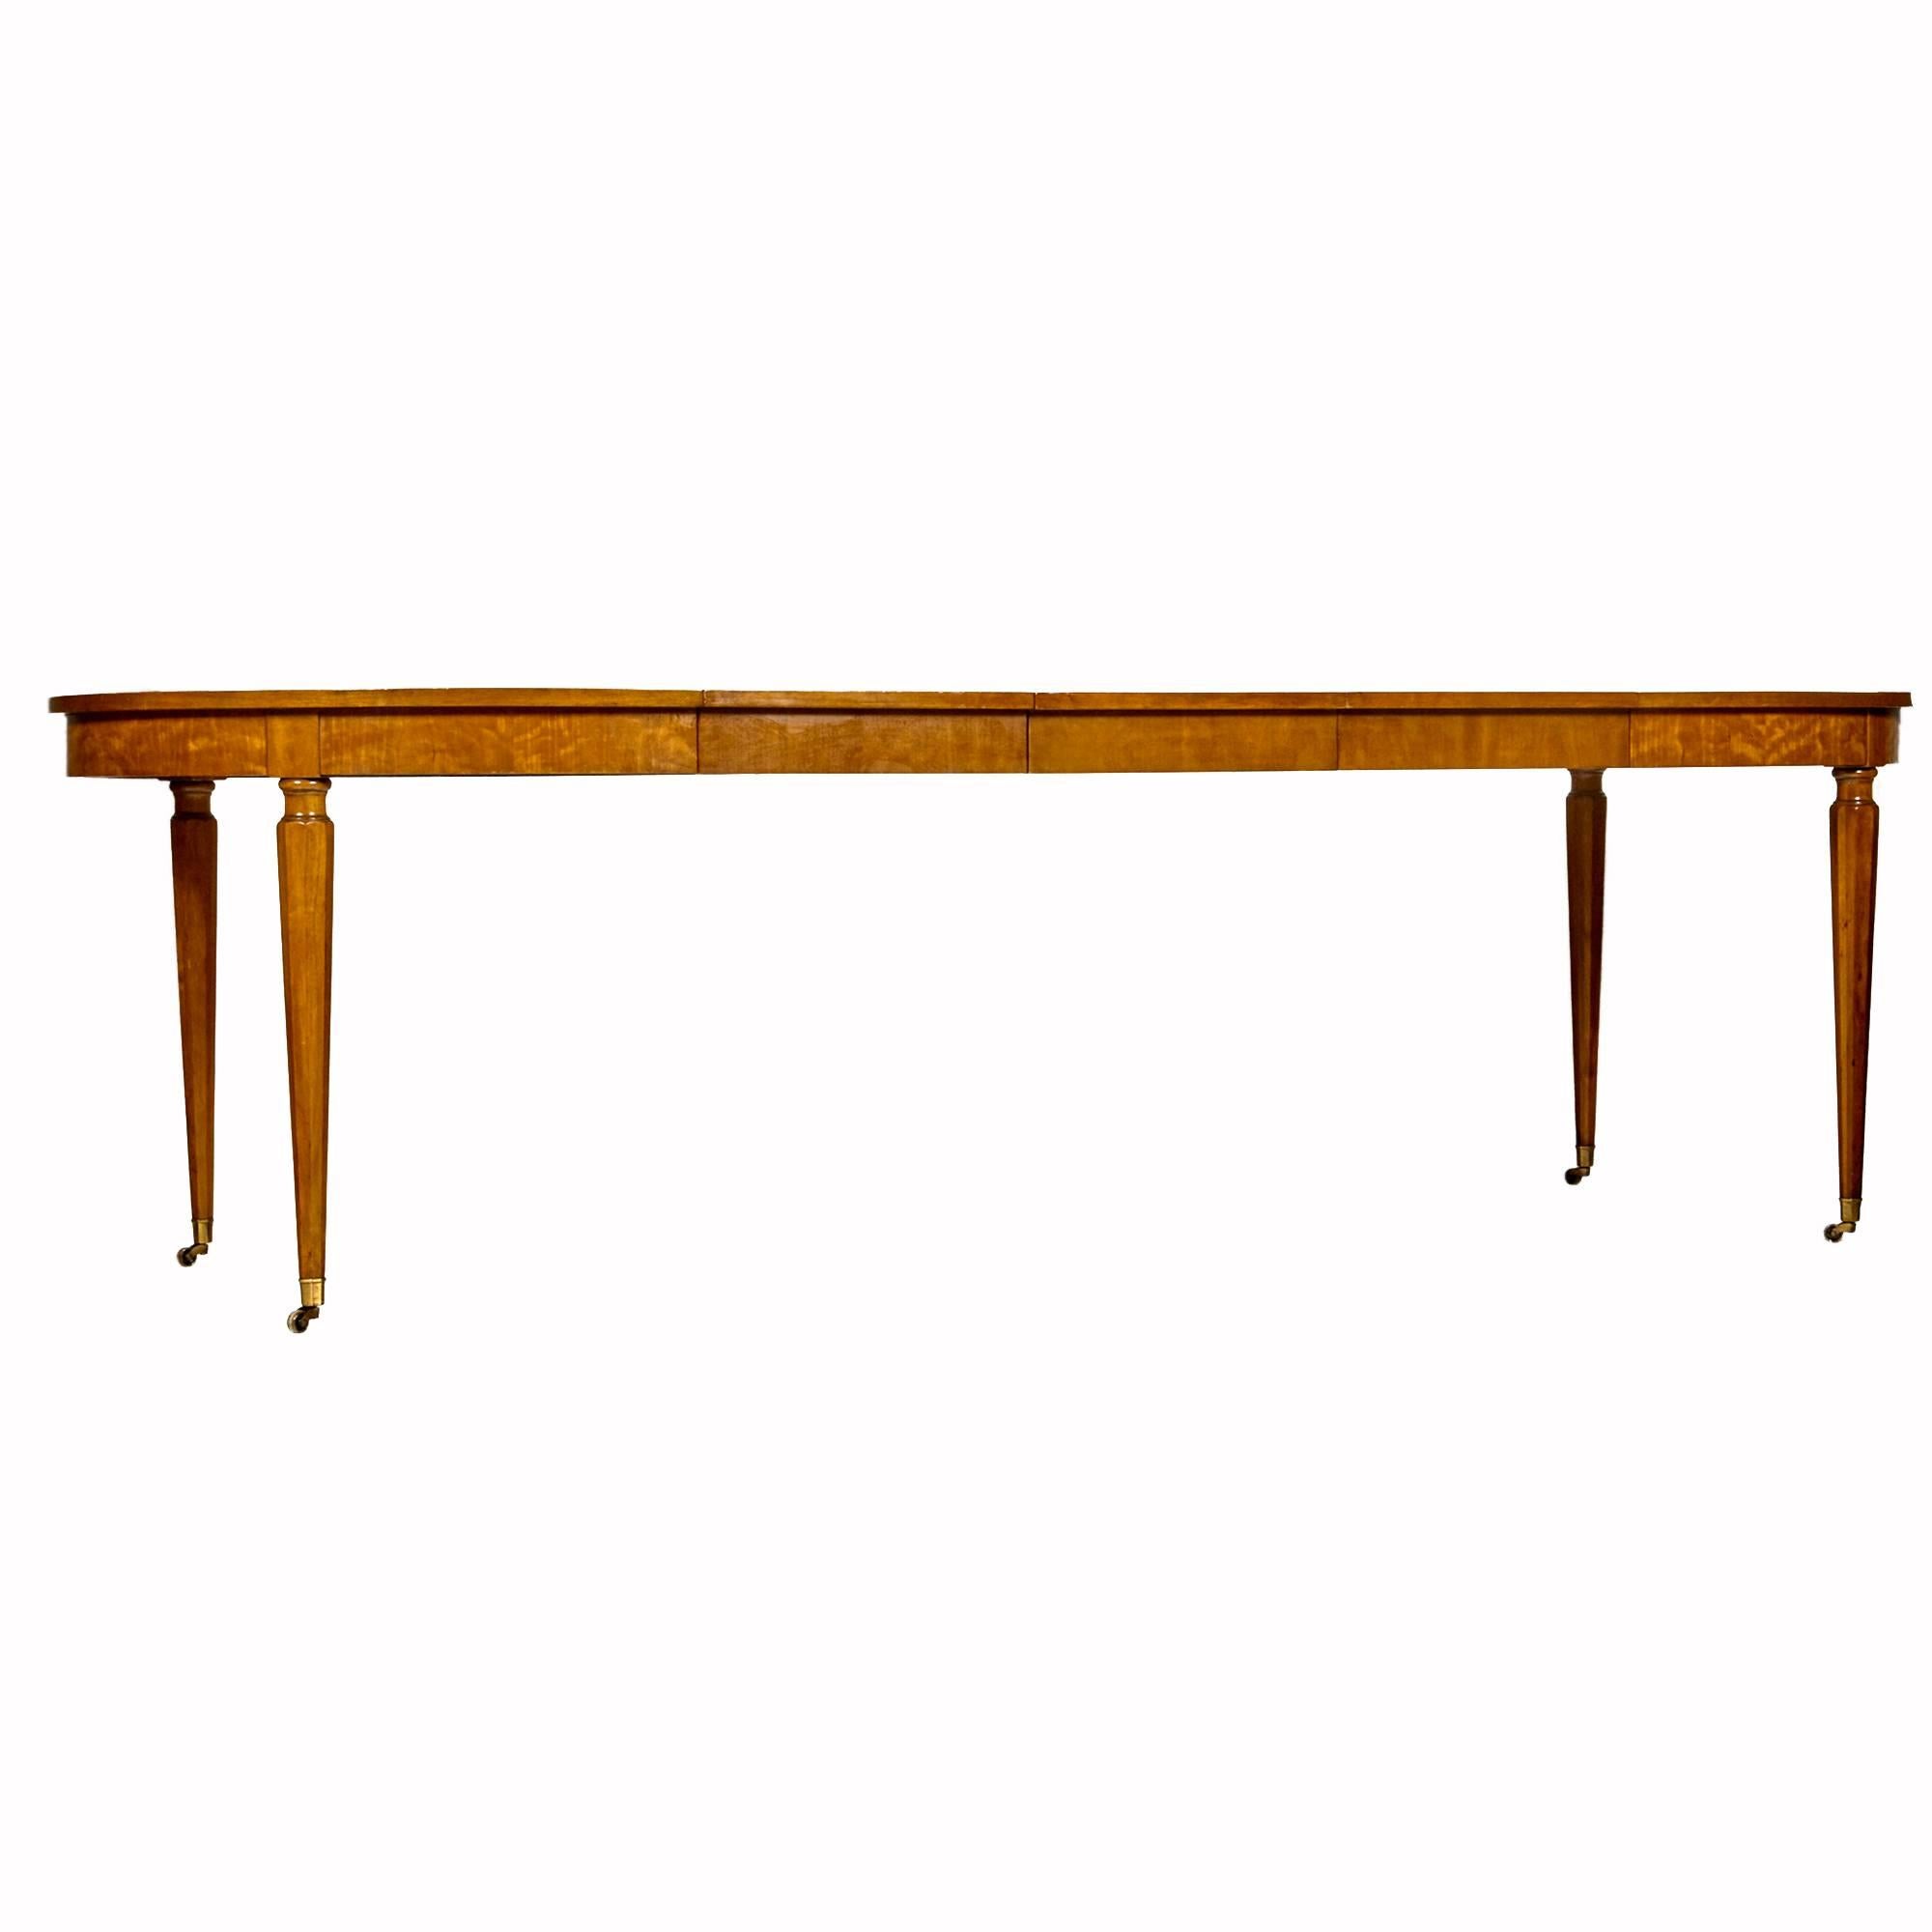 Vintage 1960s matched cherrywood banquet-style dining room table with the Belvedere finish by Kindel Furniture Co. Tapered and fluted table legs on brass castors. The table has three leaves 16in.W each. The table is 100in.L fully open. Marked.

 